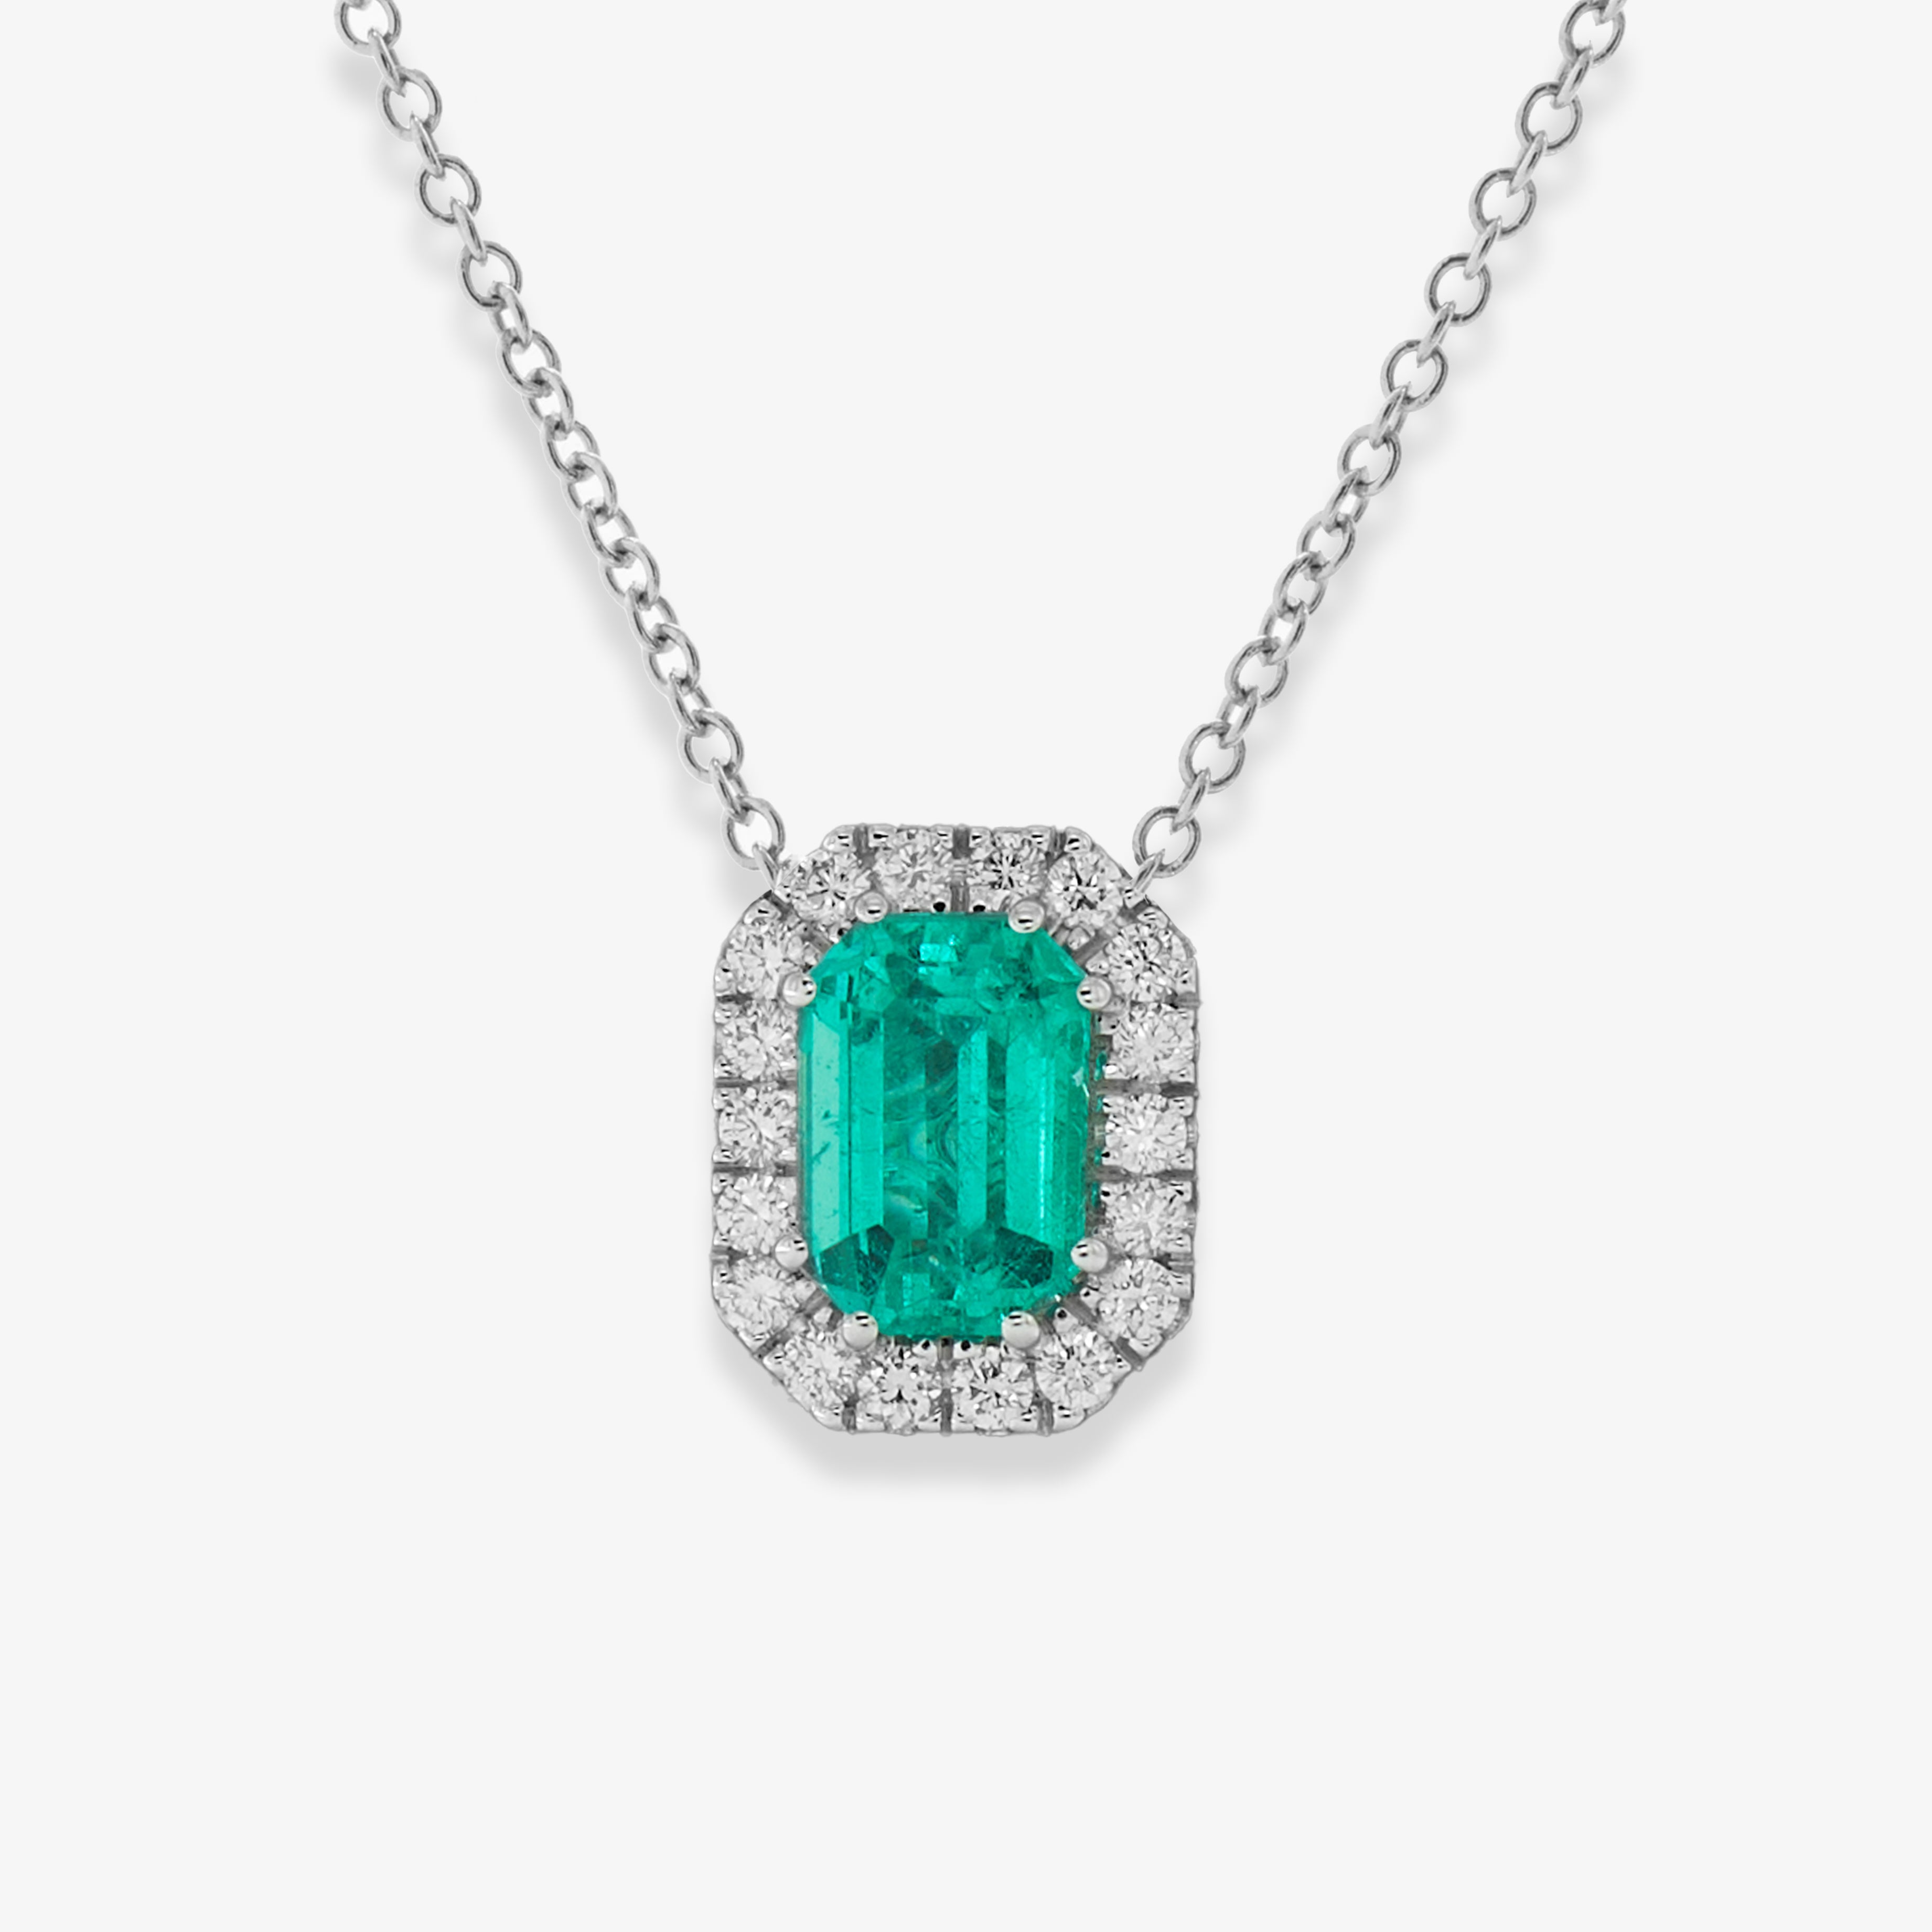 Columbia emerald necklace 2.72 ct